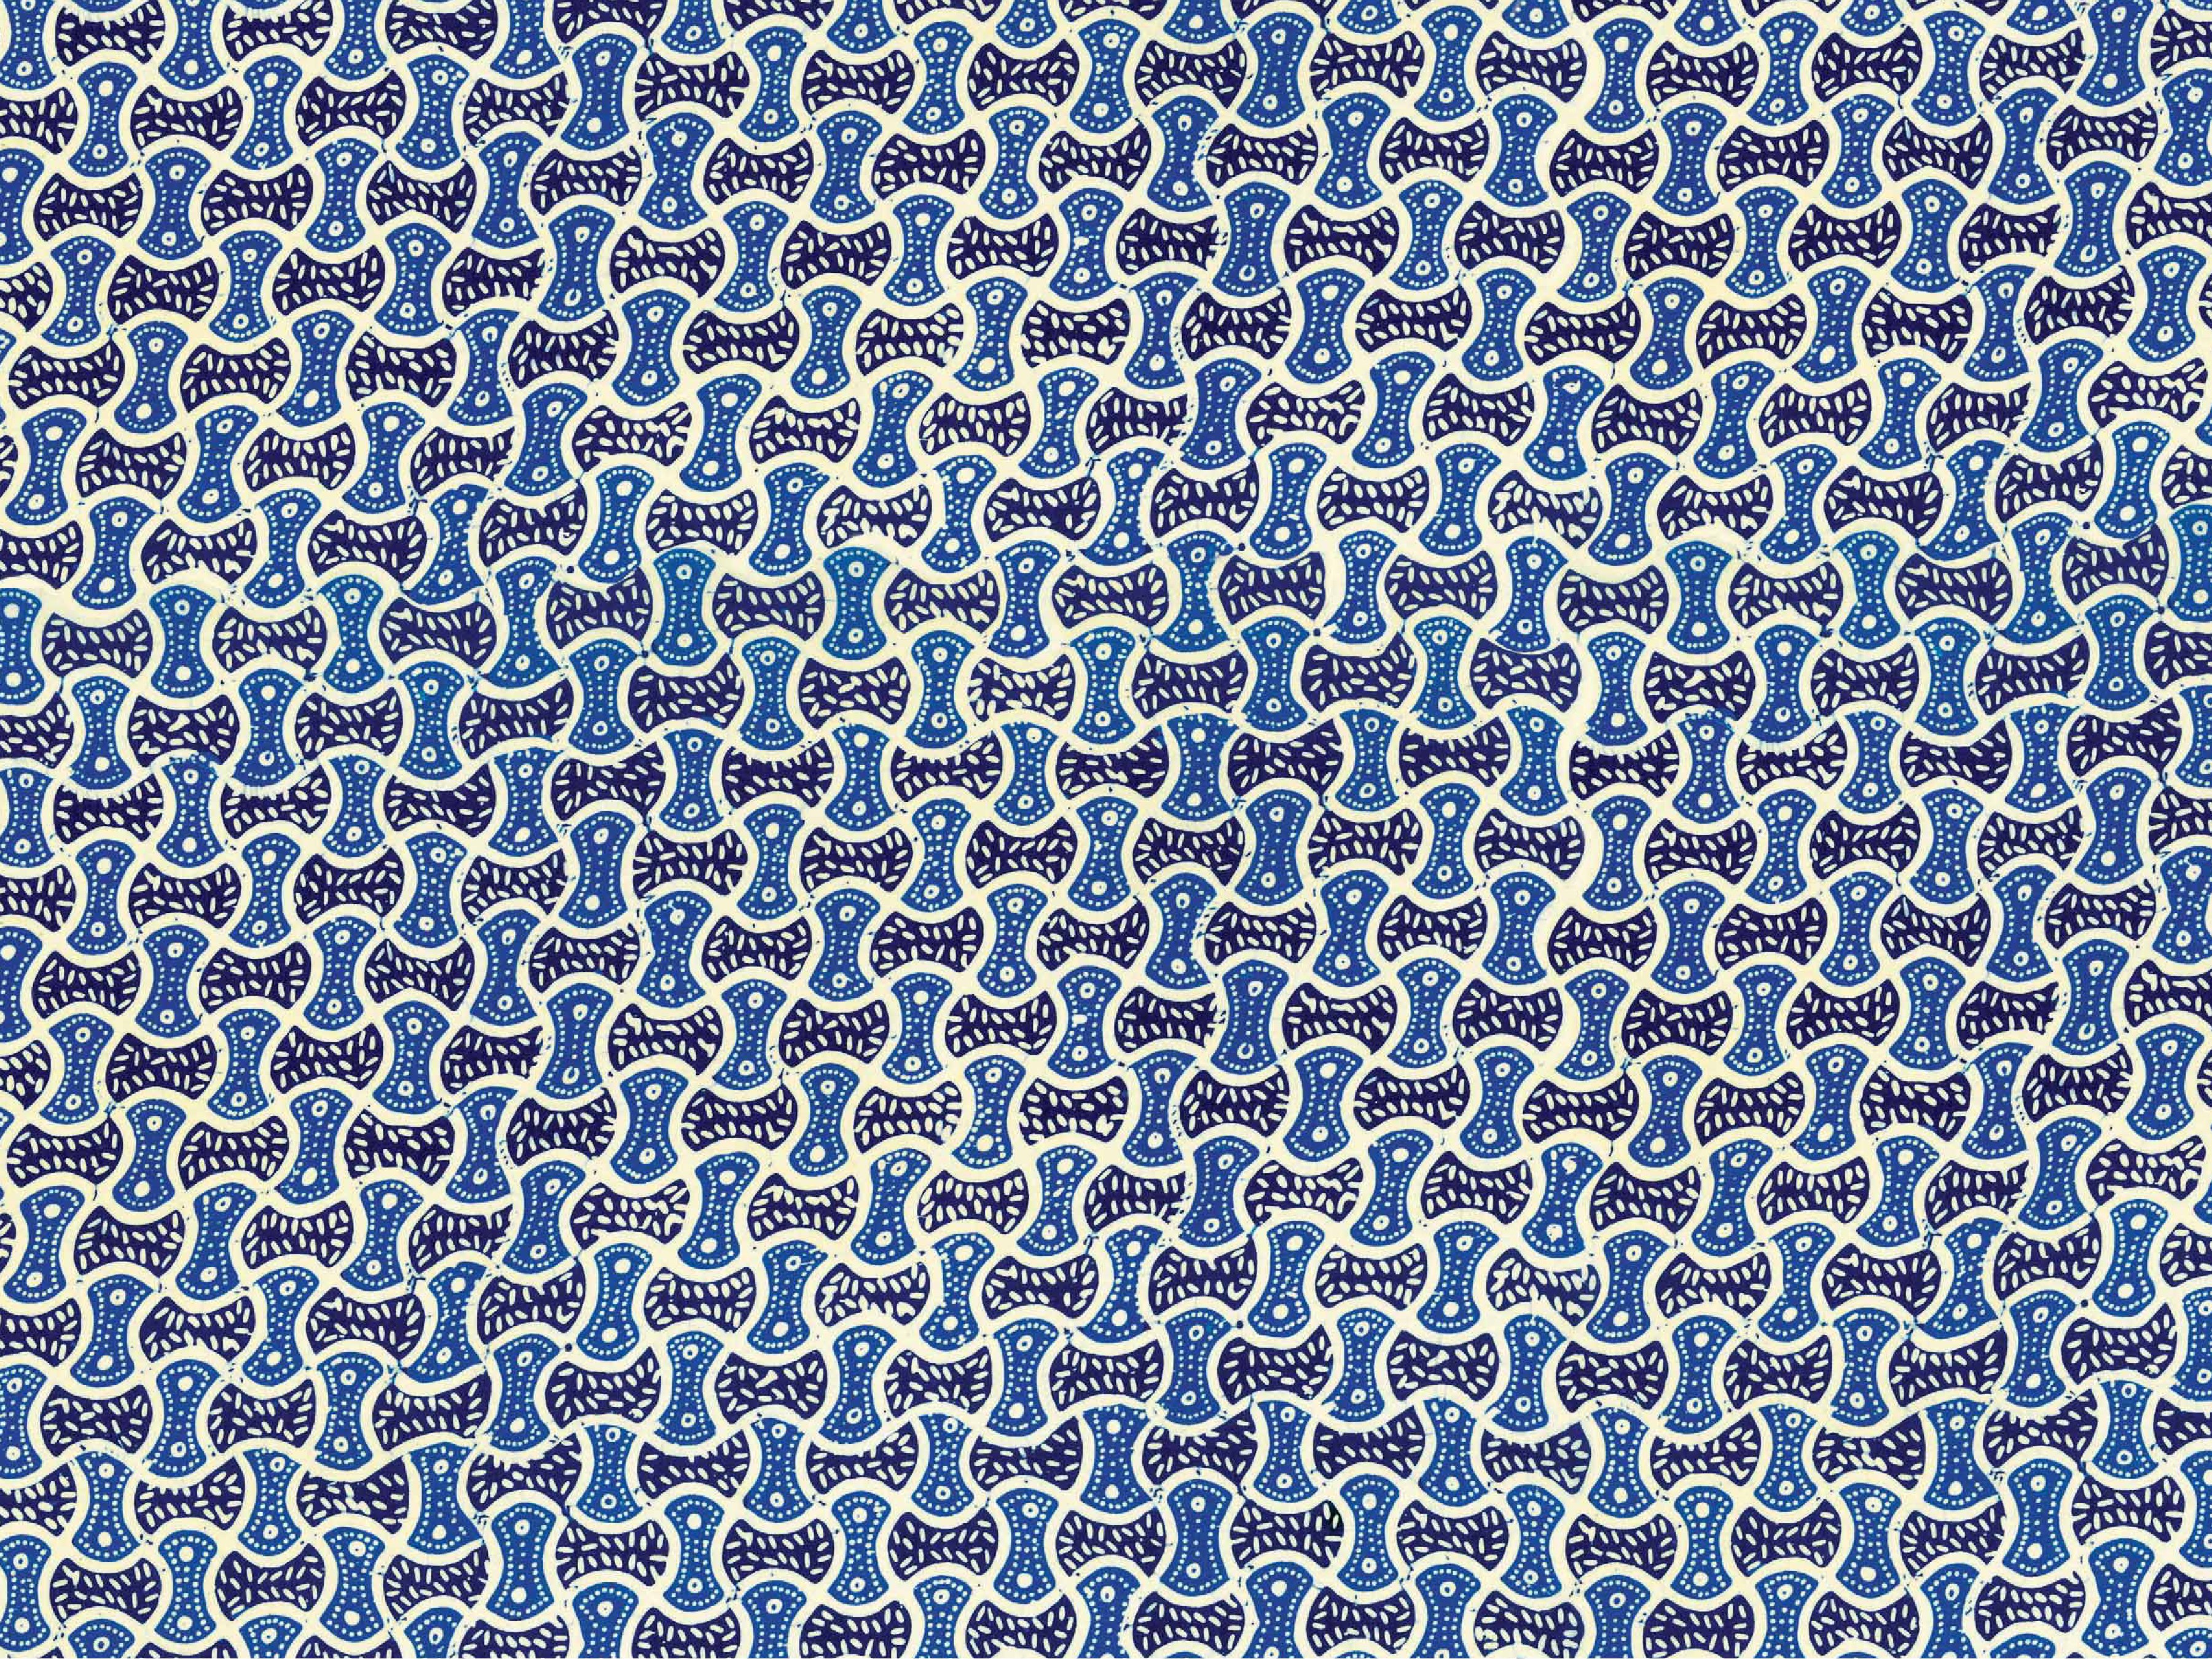 Blue & White Gift Wrapping Papers - 12 Sheets